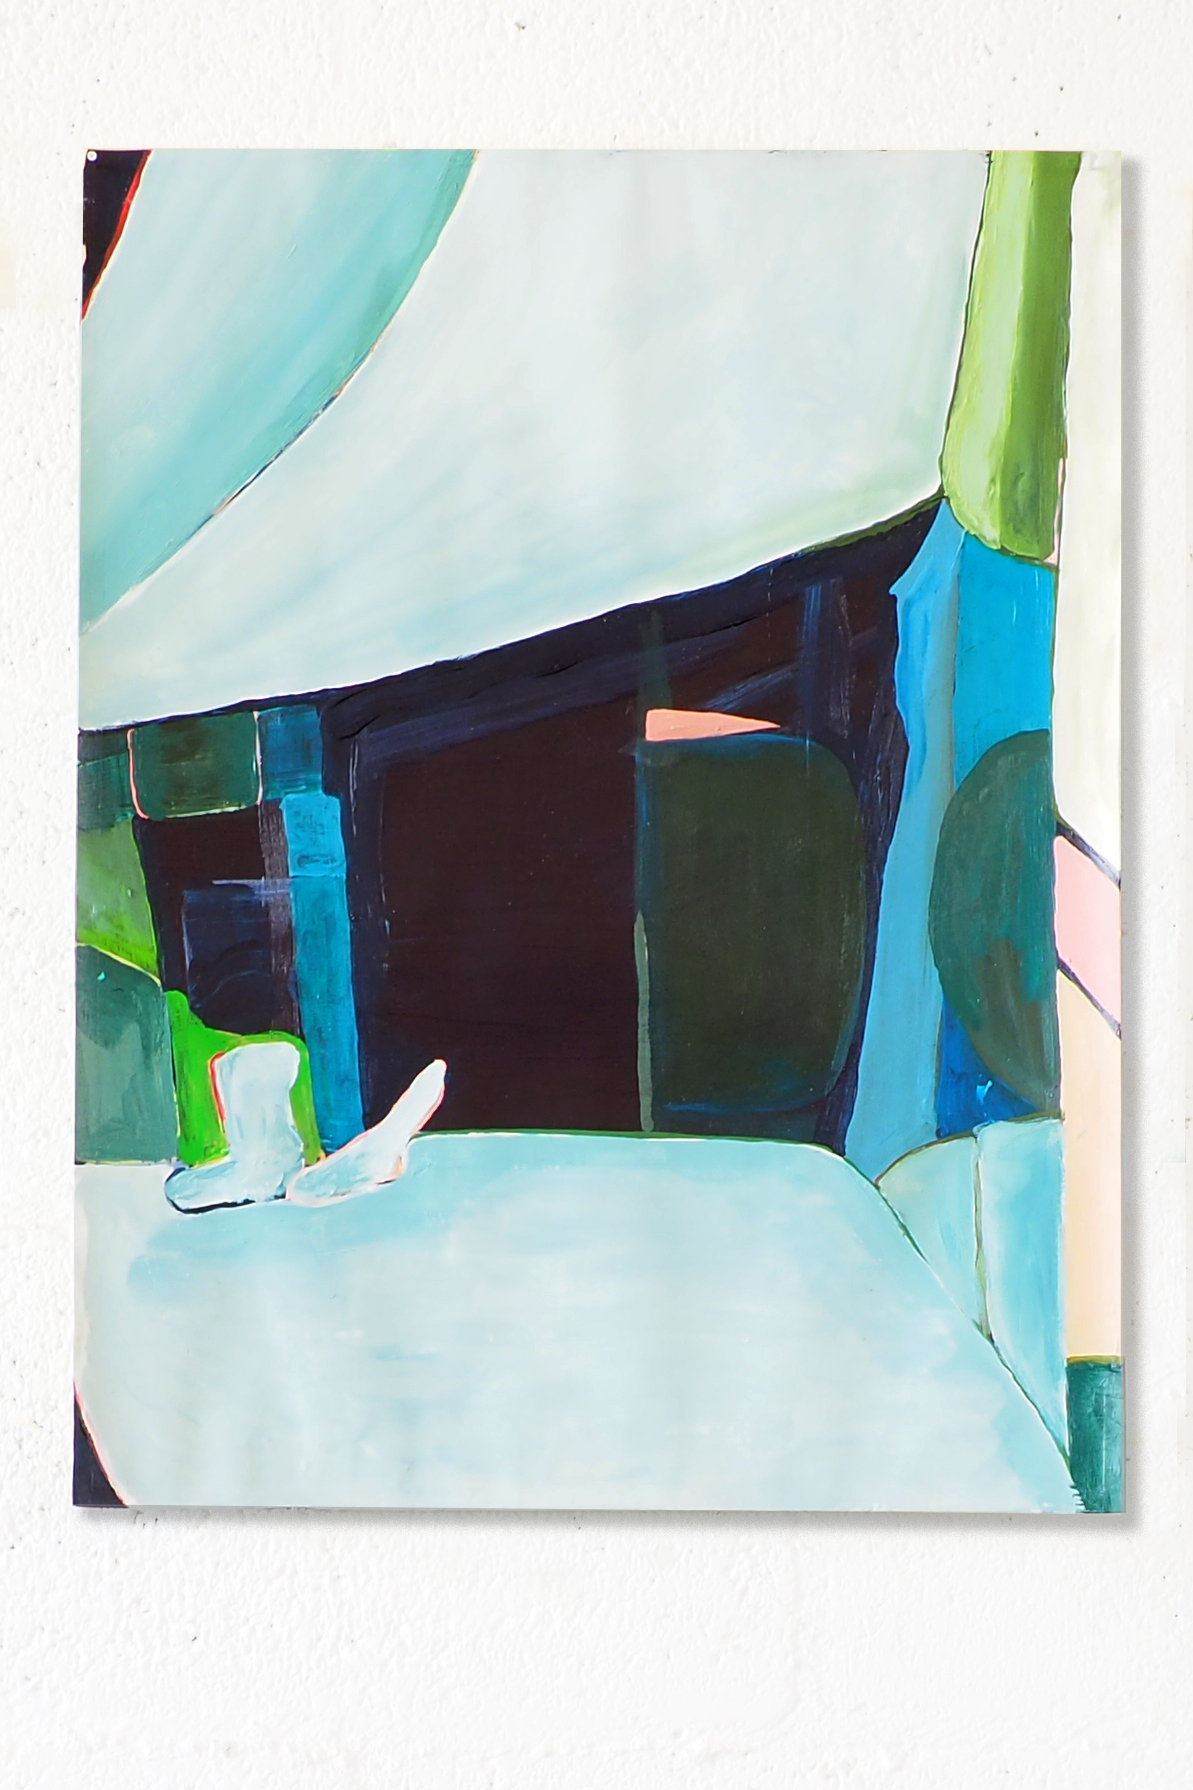 Interior nr. 086 Dimensions 40 cm x 60 cm Materials: acrylic on paper Year 2020